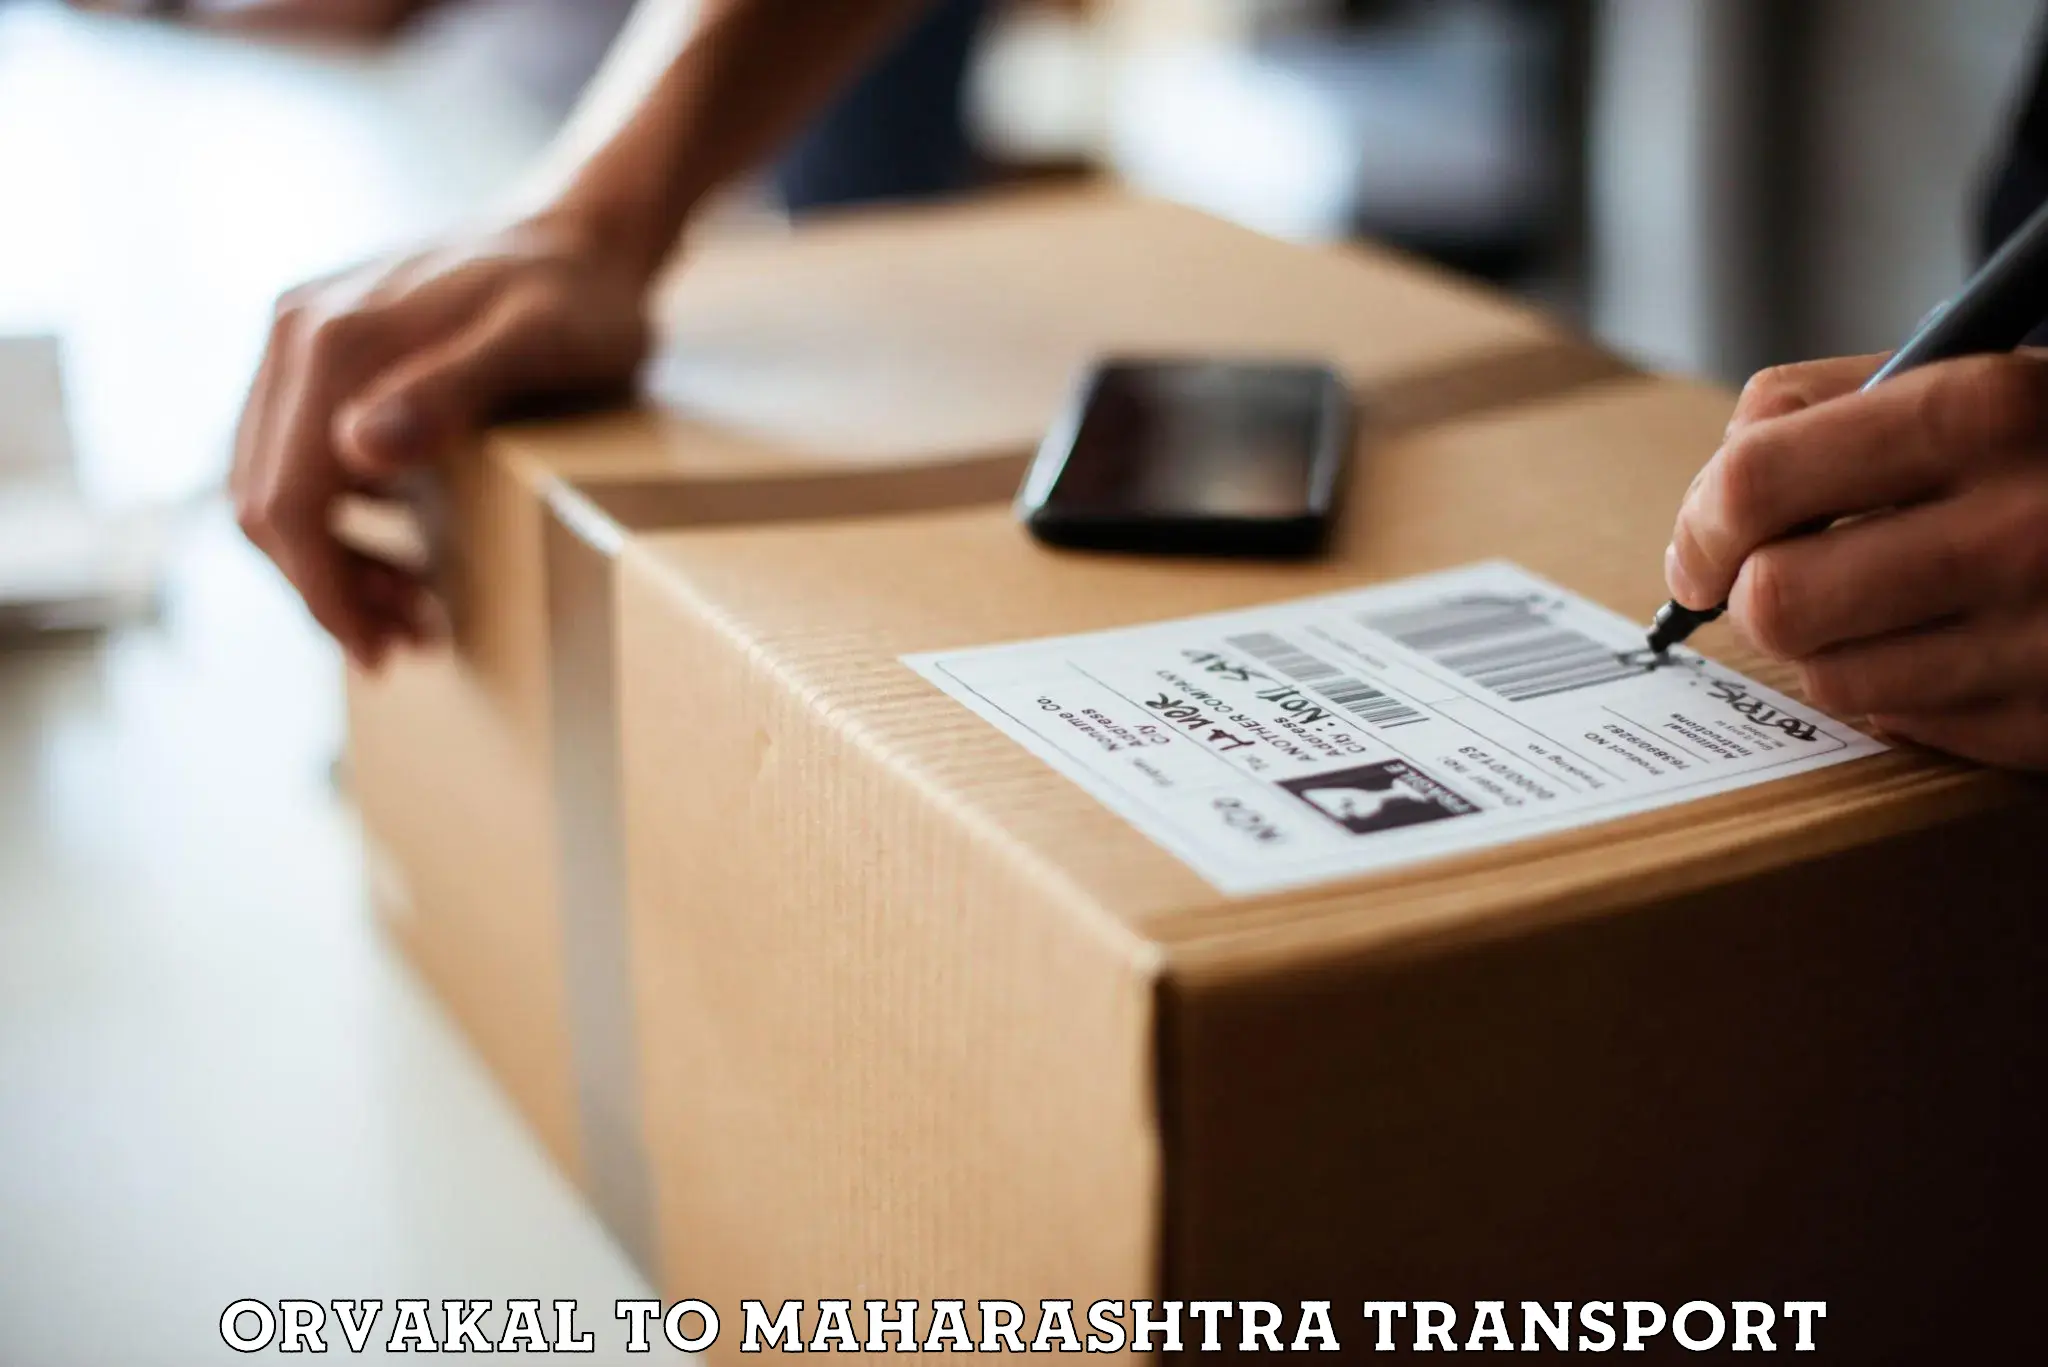 Truck transport companies in India Orvakal to Vasmat